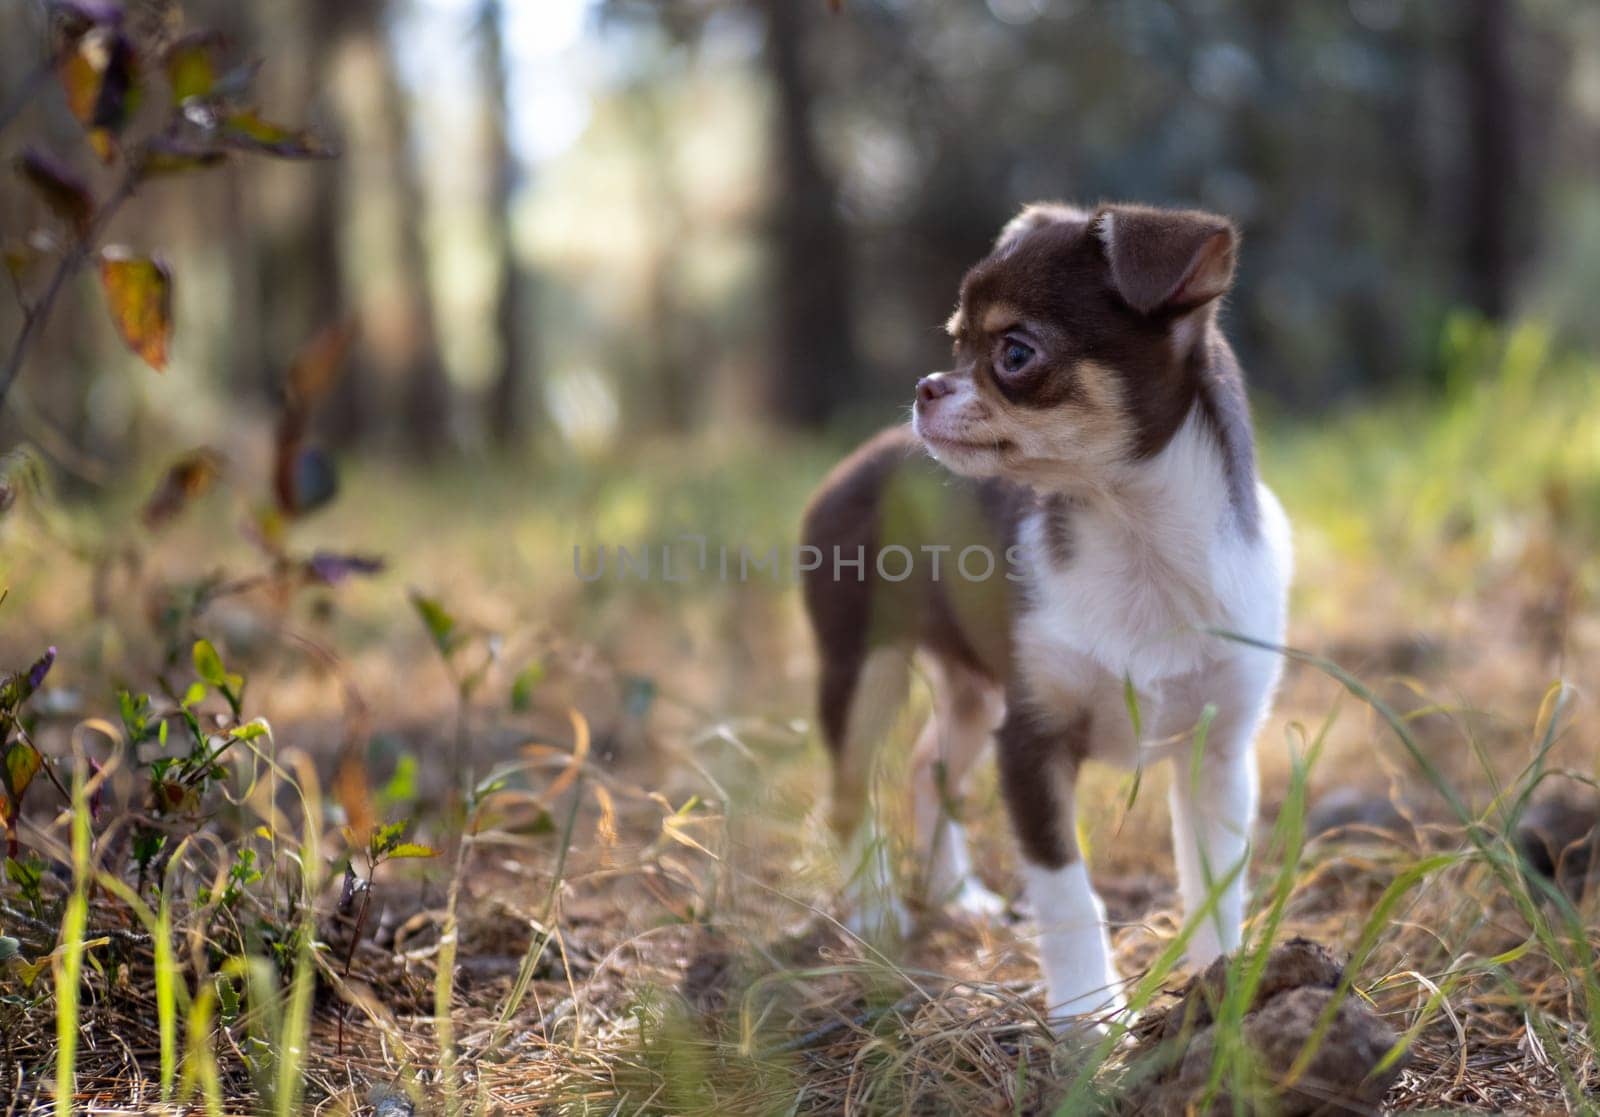 A small Chihuahua puppy stands attentively in a forest, surrounded by a blurred natural backdrop and fallen leaves.